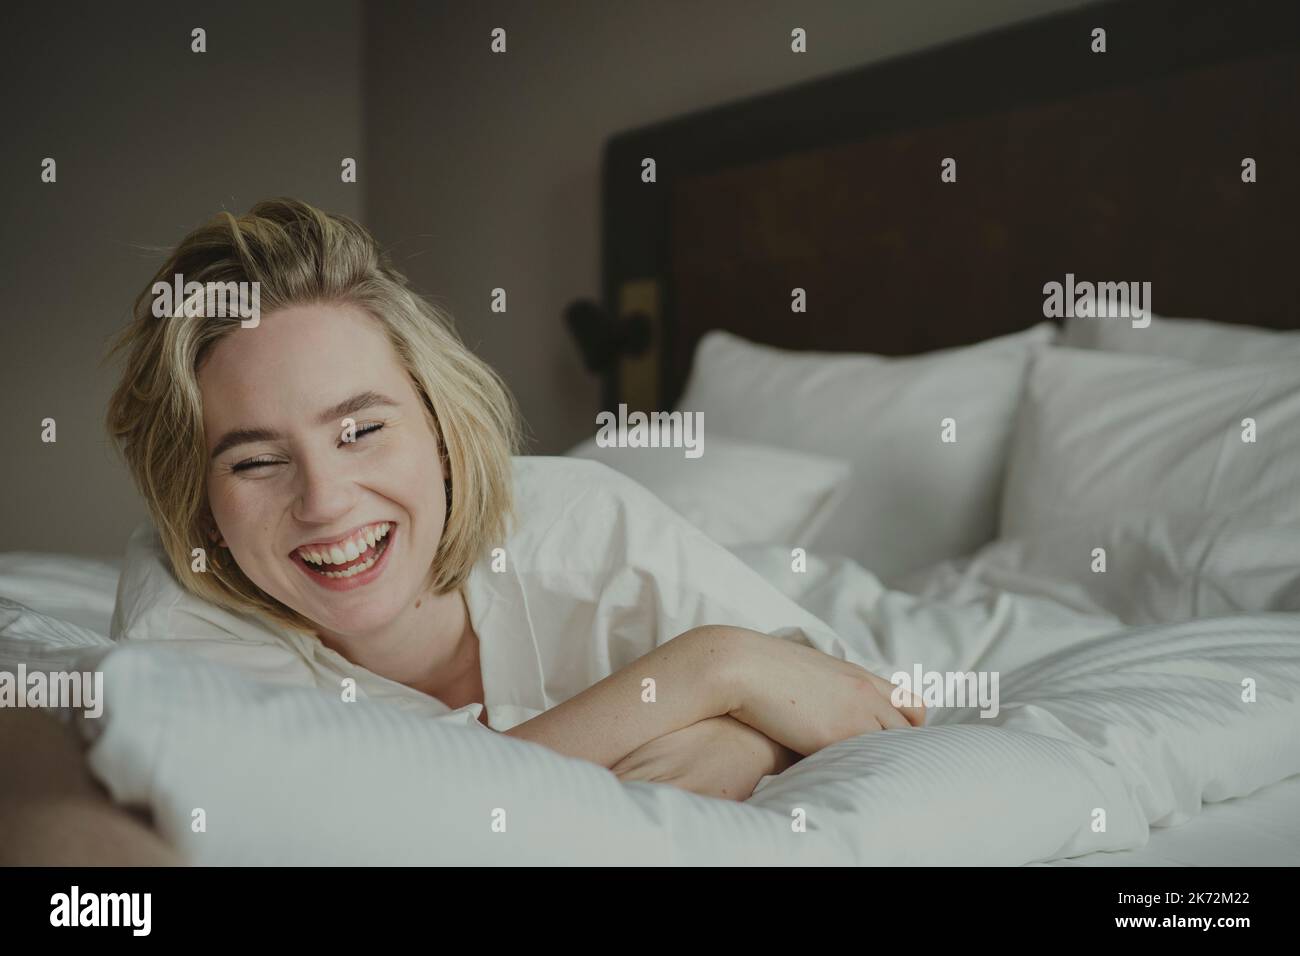 Blond woman laughing in bedroom Stock Photo